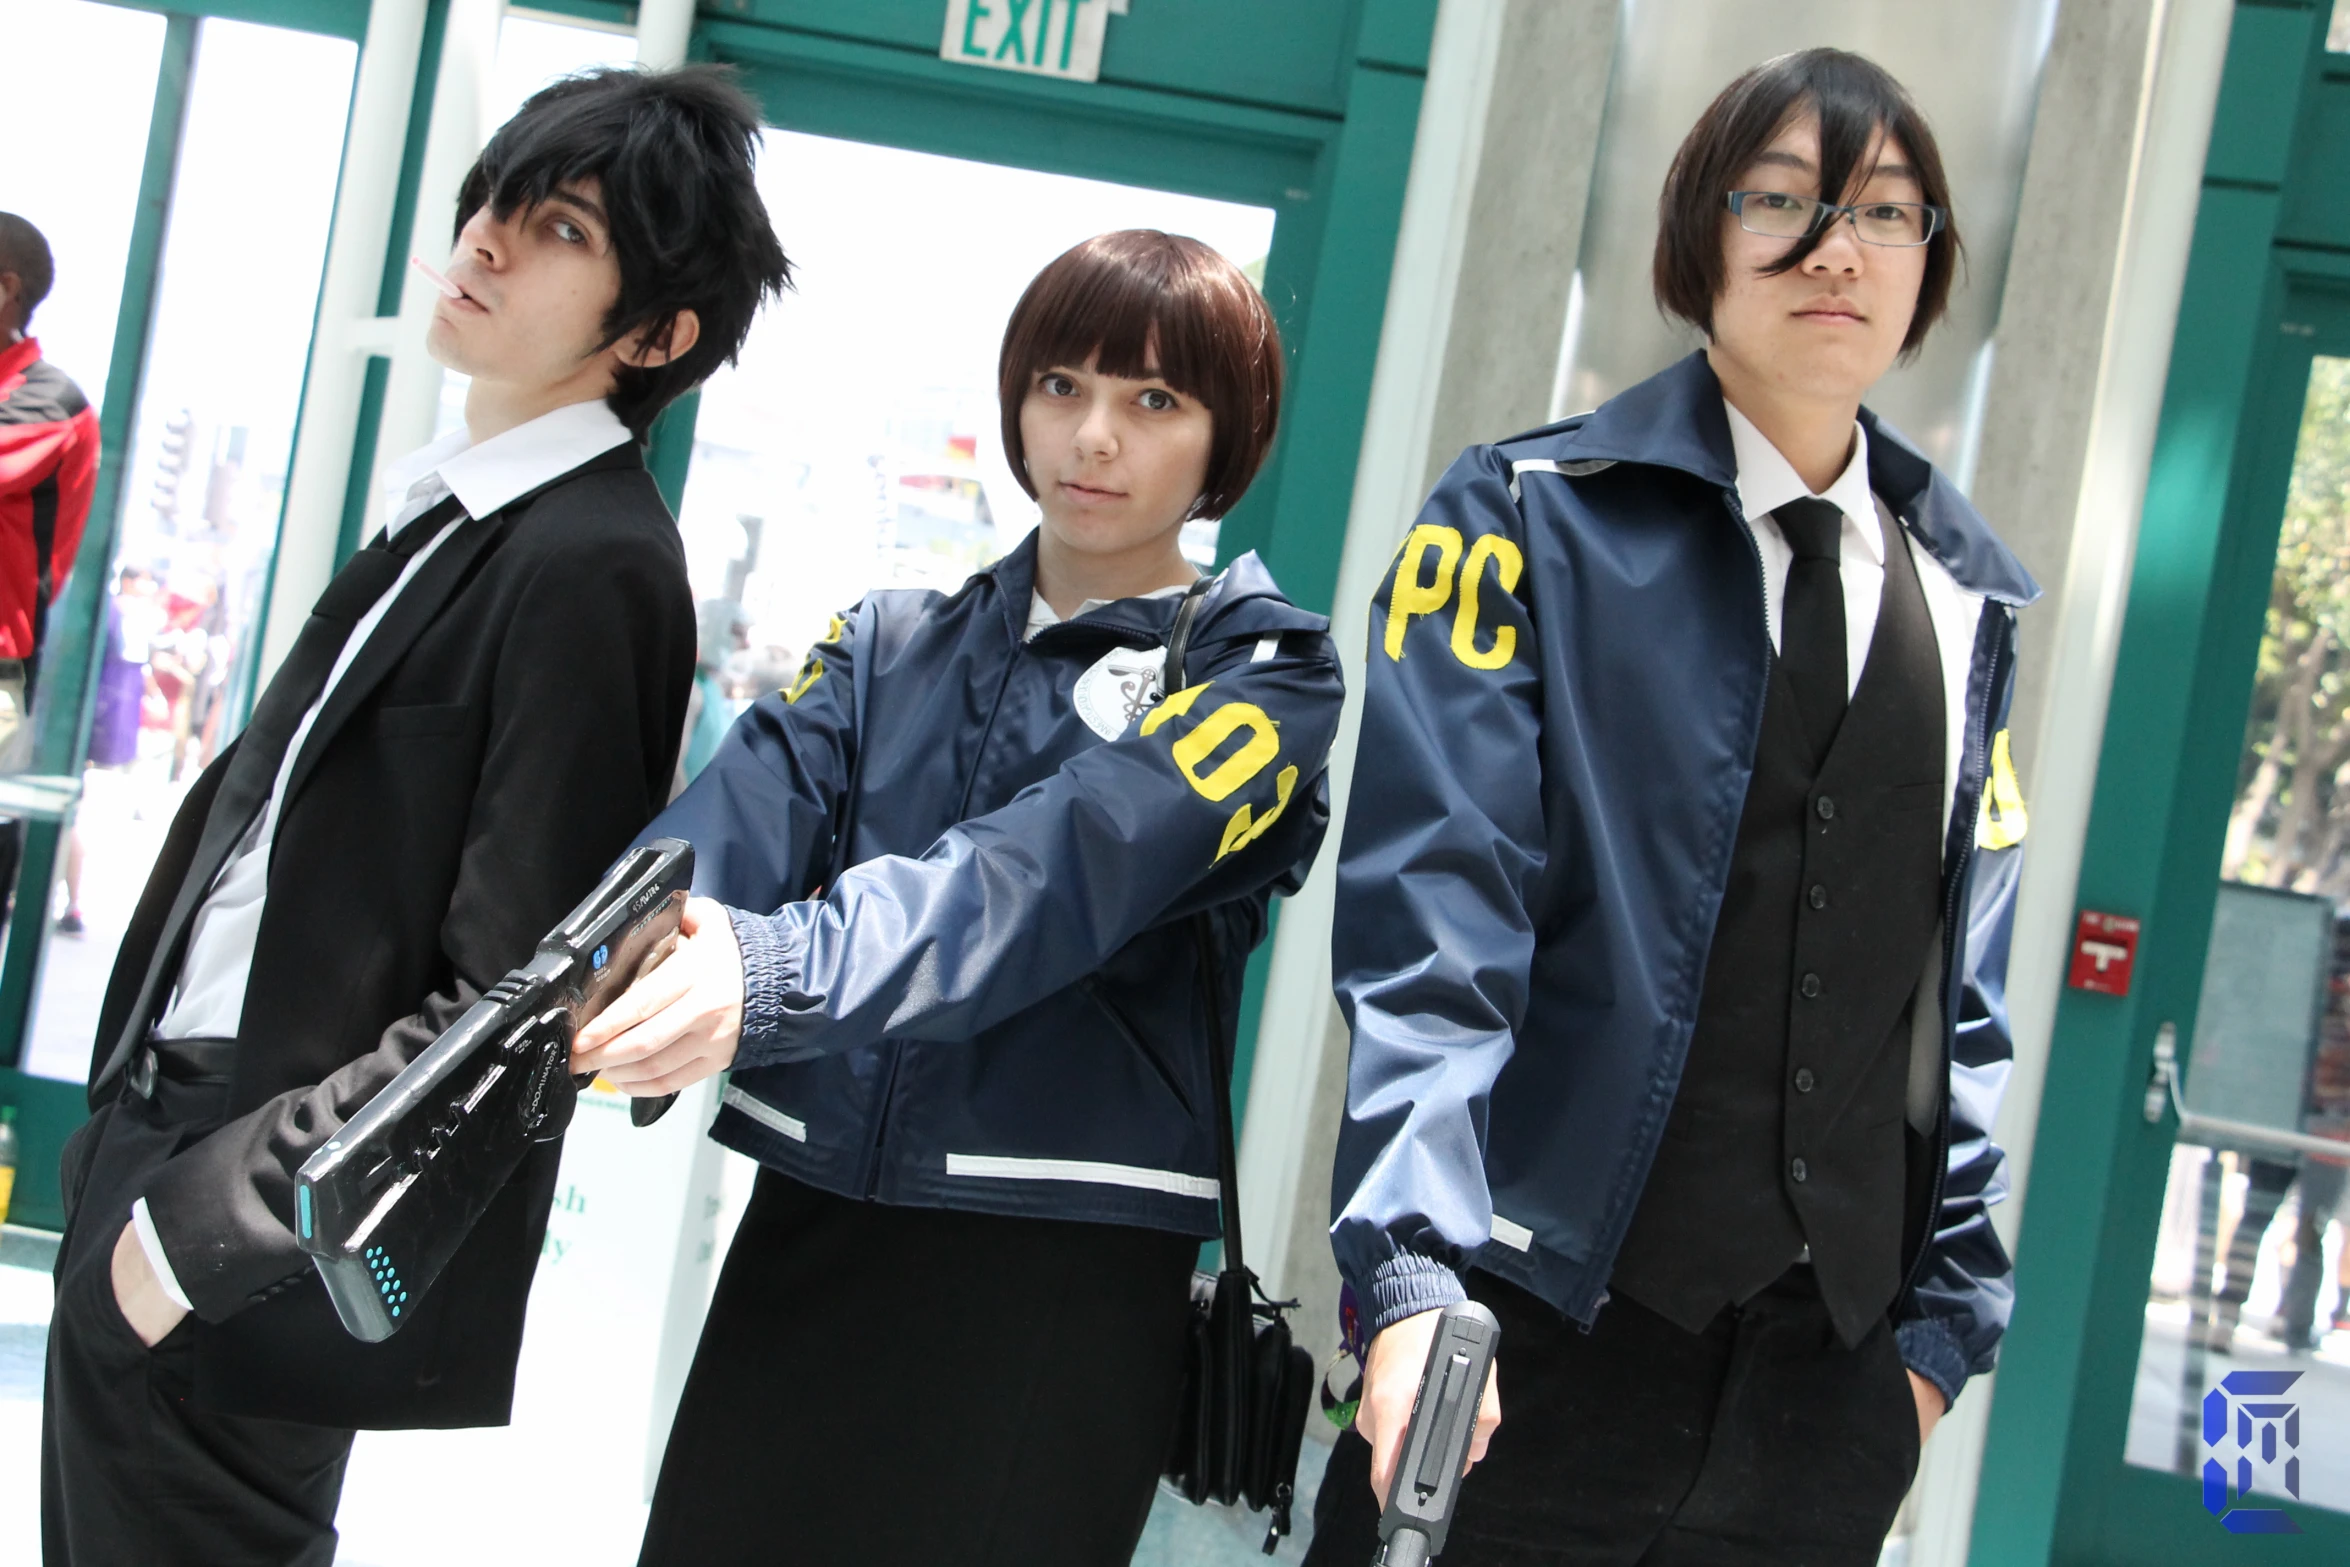 three young people are dressed in uniforms standing outside